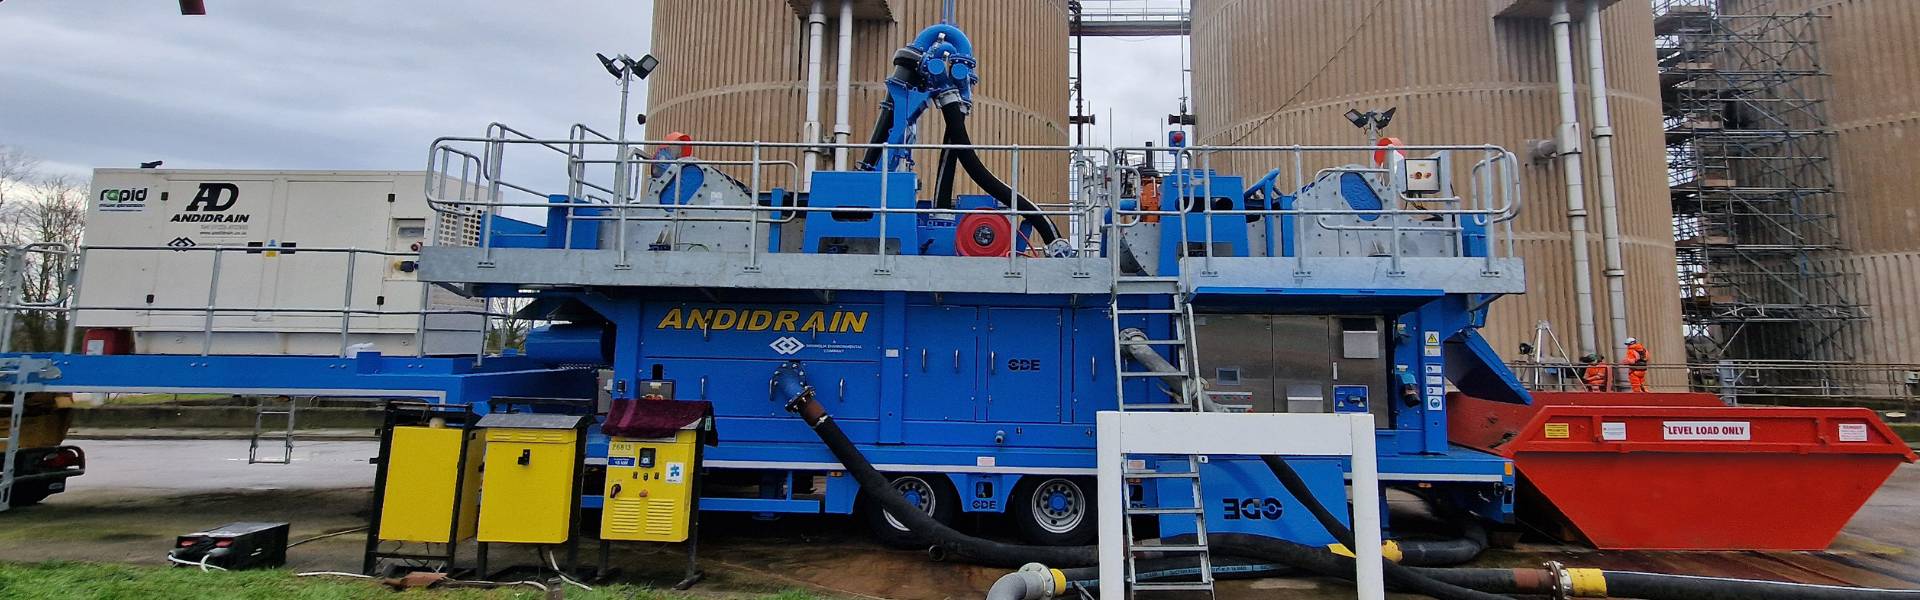 Andidrain enhances its CDE fleet with 8th investment in mobile screening technology